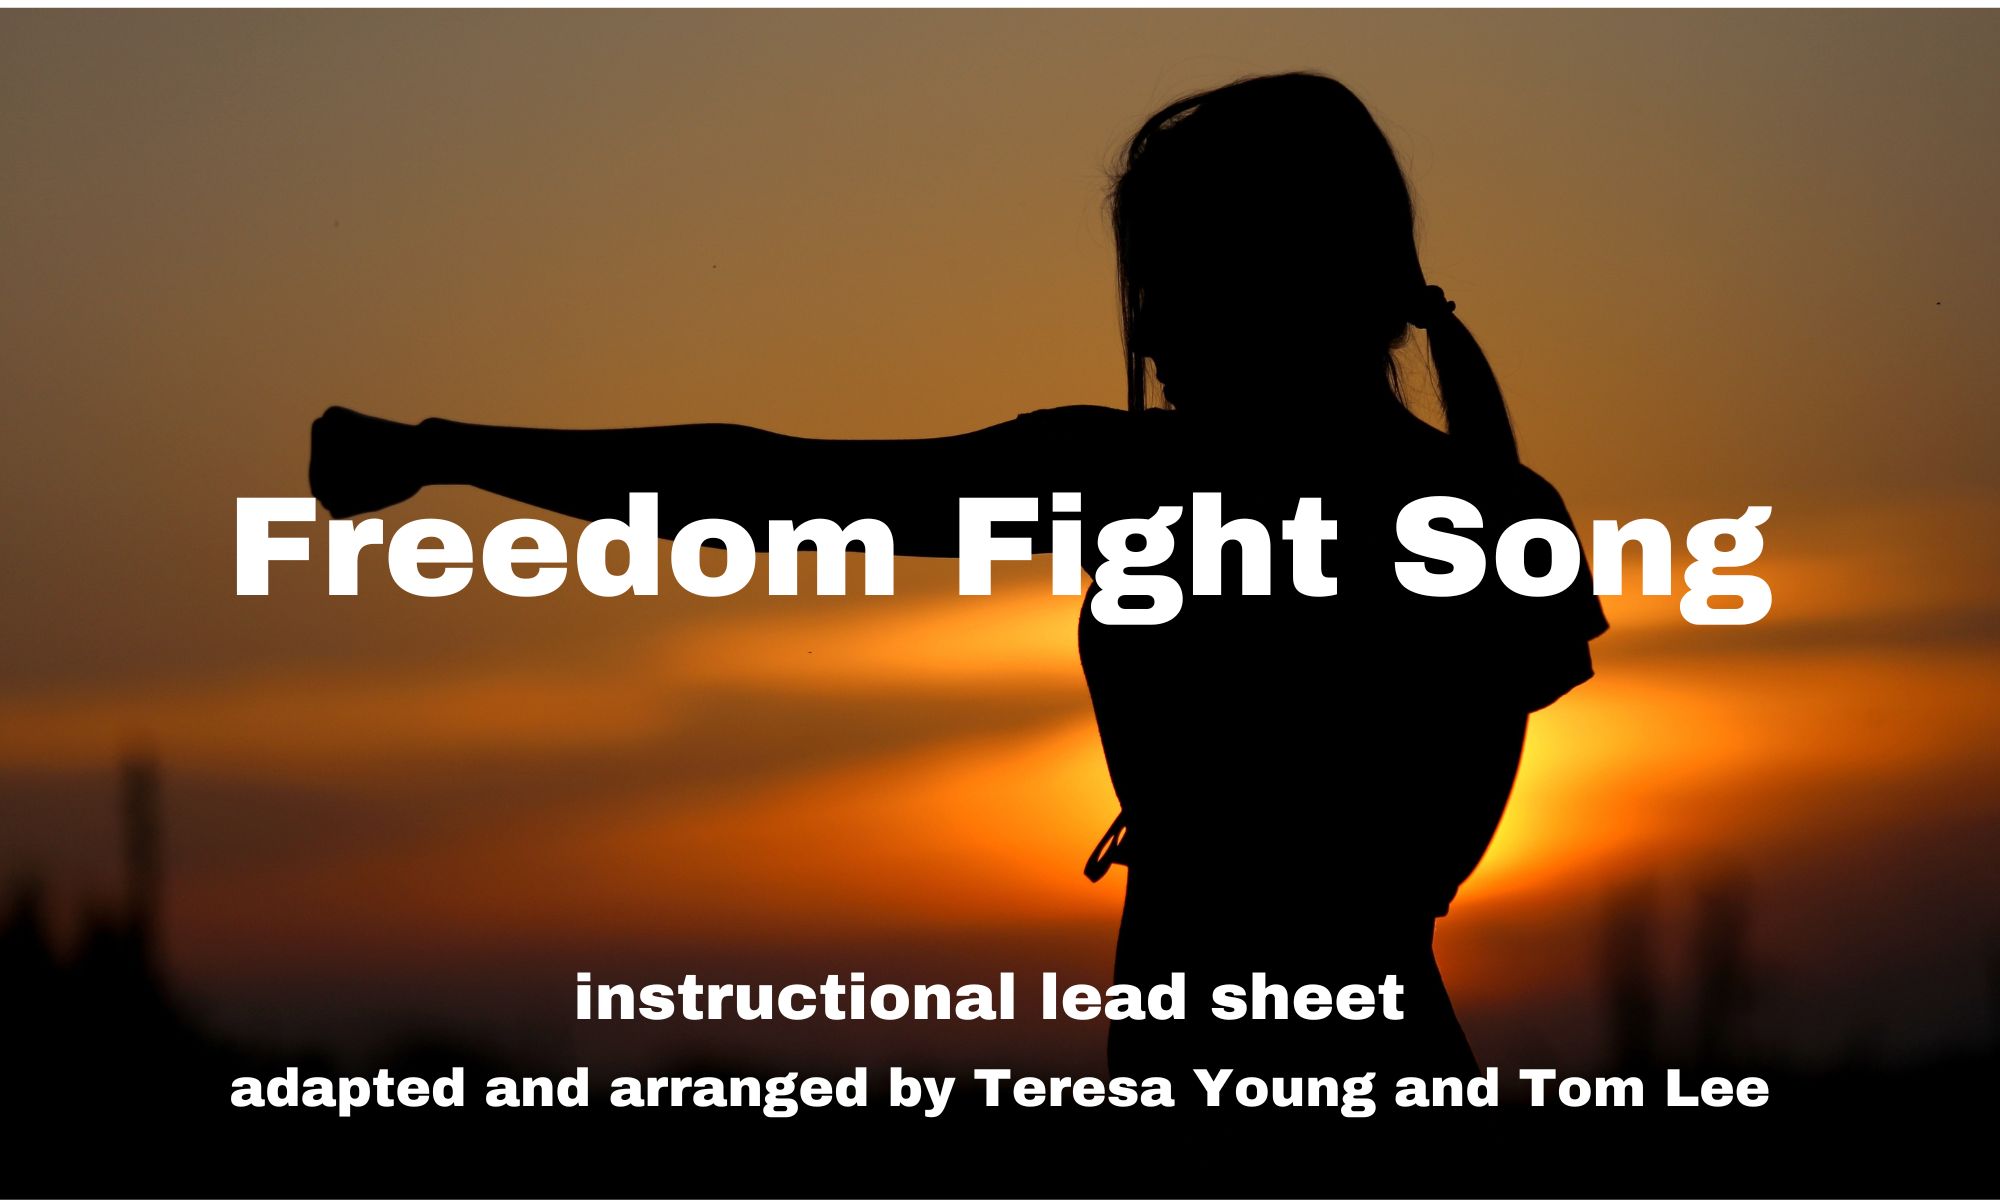 Freedom Fight Song adapted by Teresa Young and Tom Lee